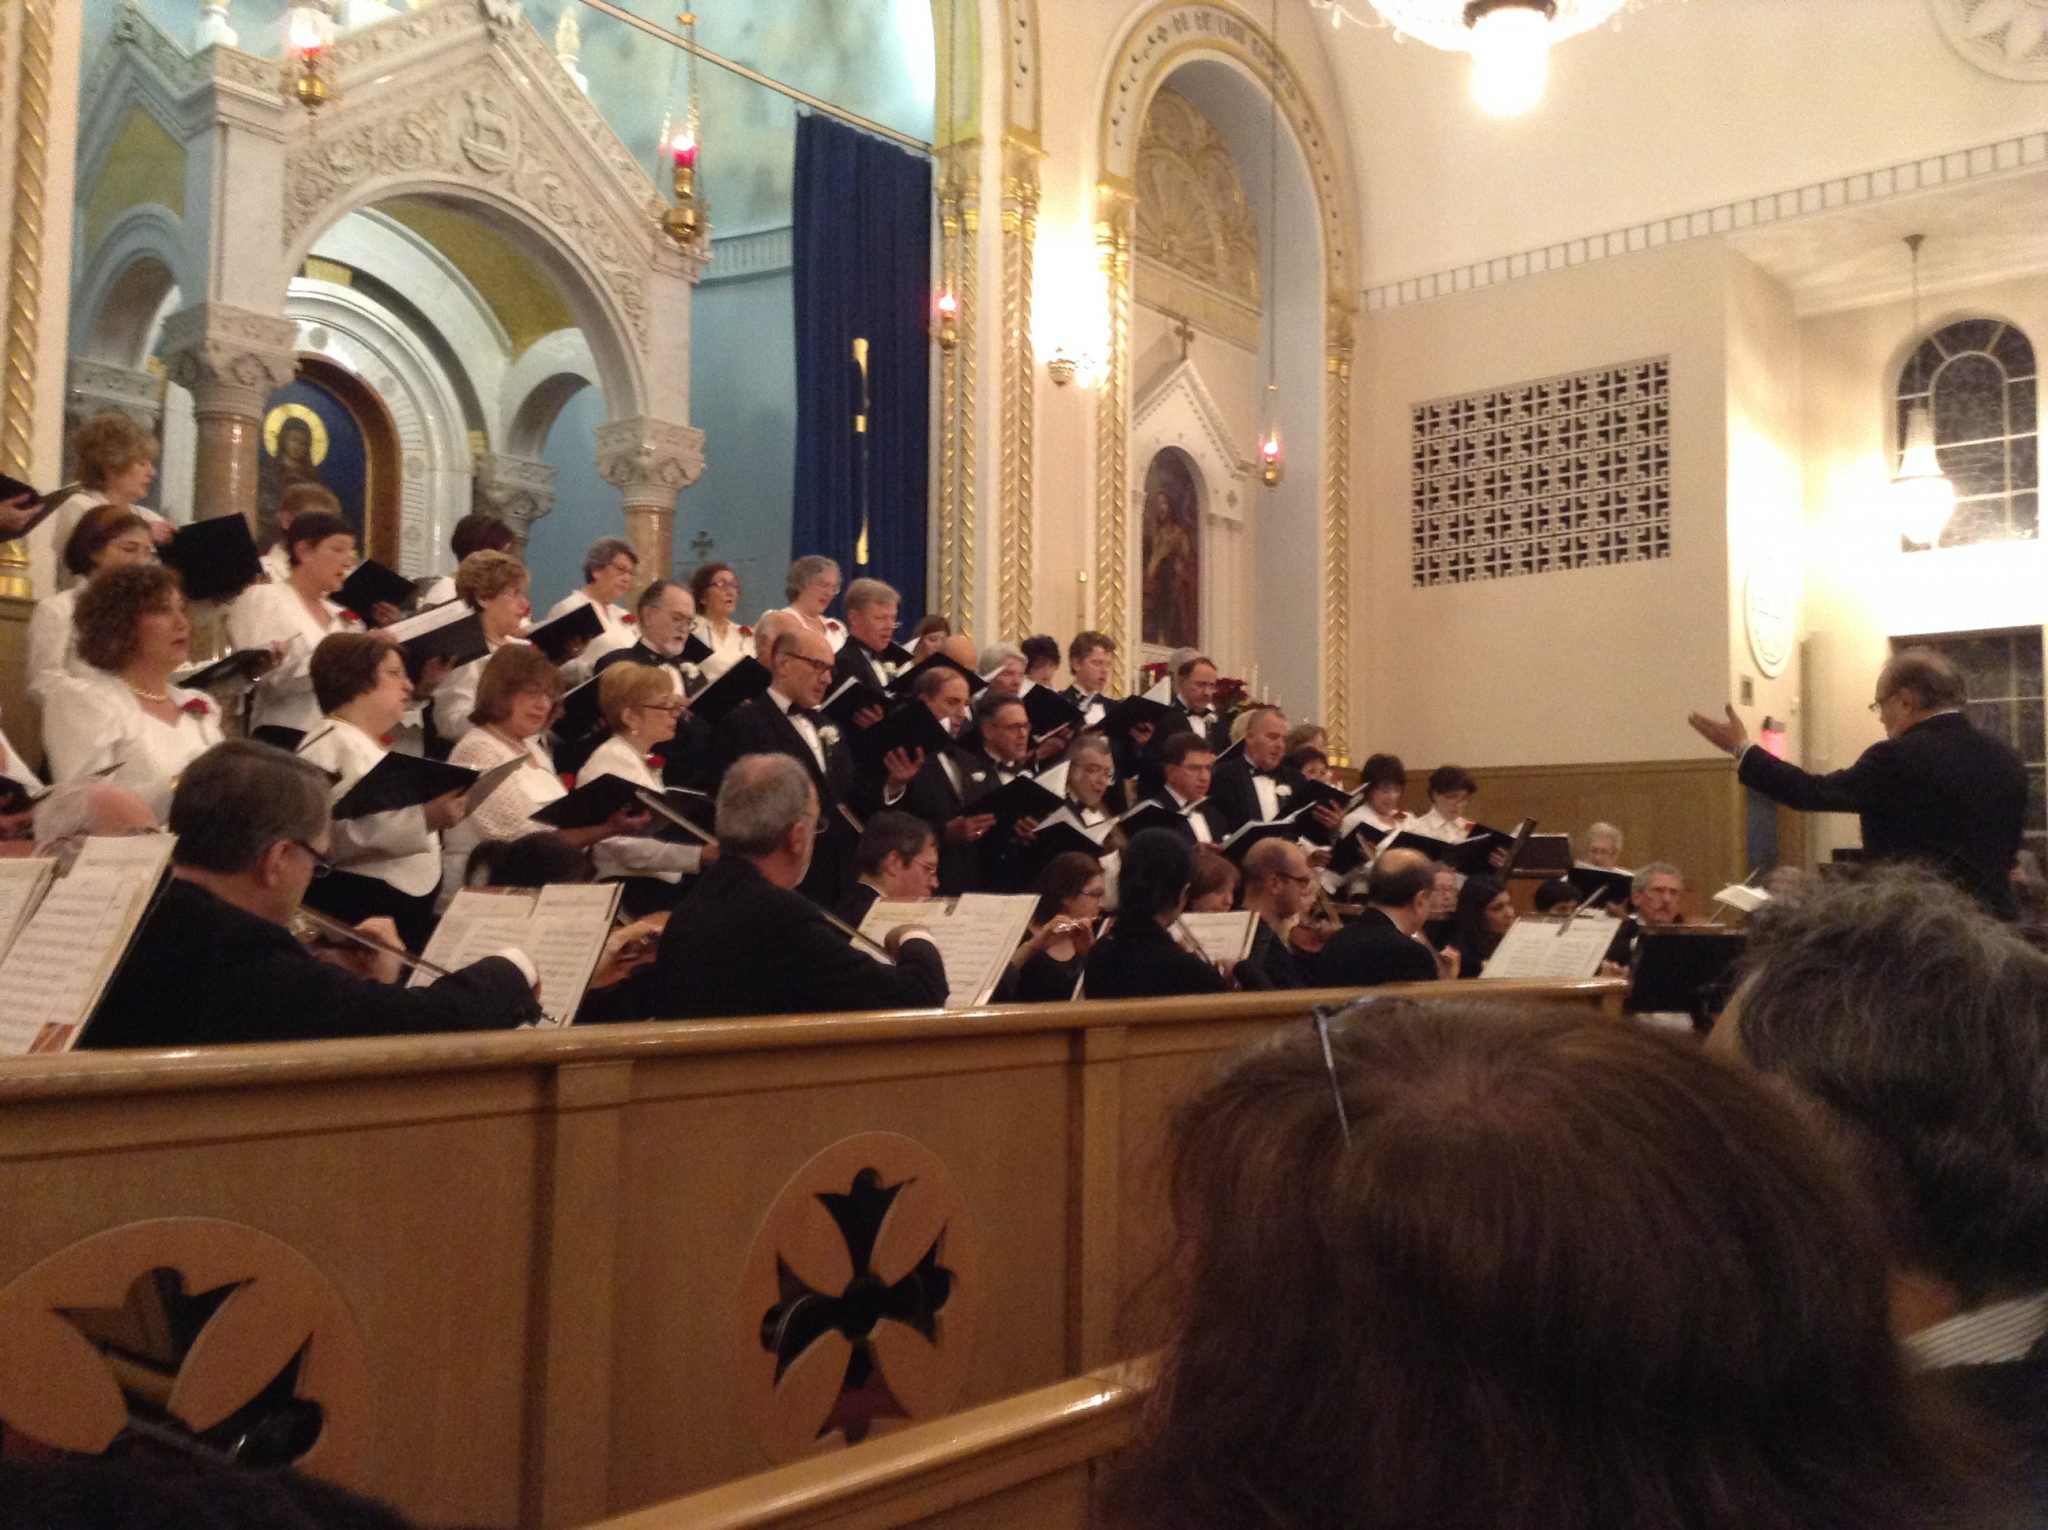 Erevan Choral Society And Orchestra S Christmas Holiday Concert To Be Held Dec 10